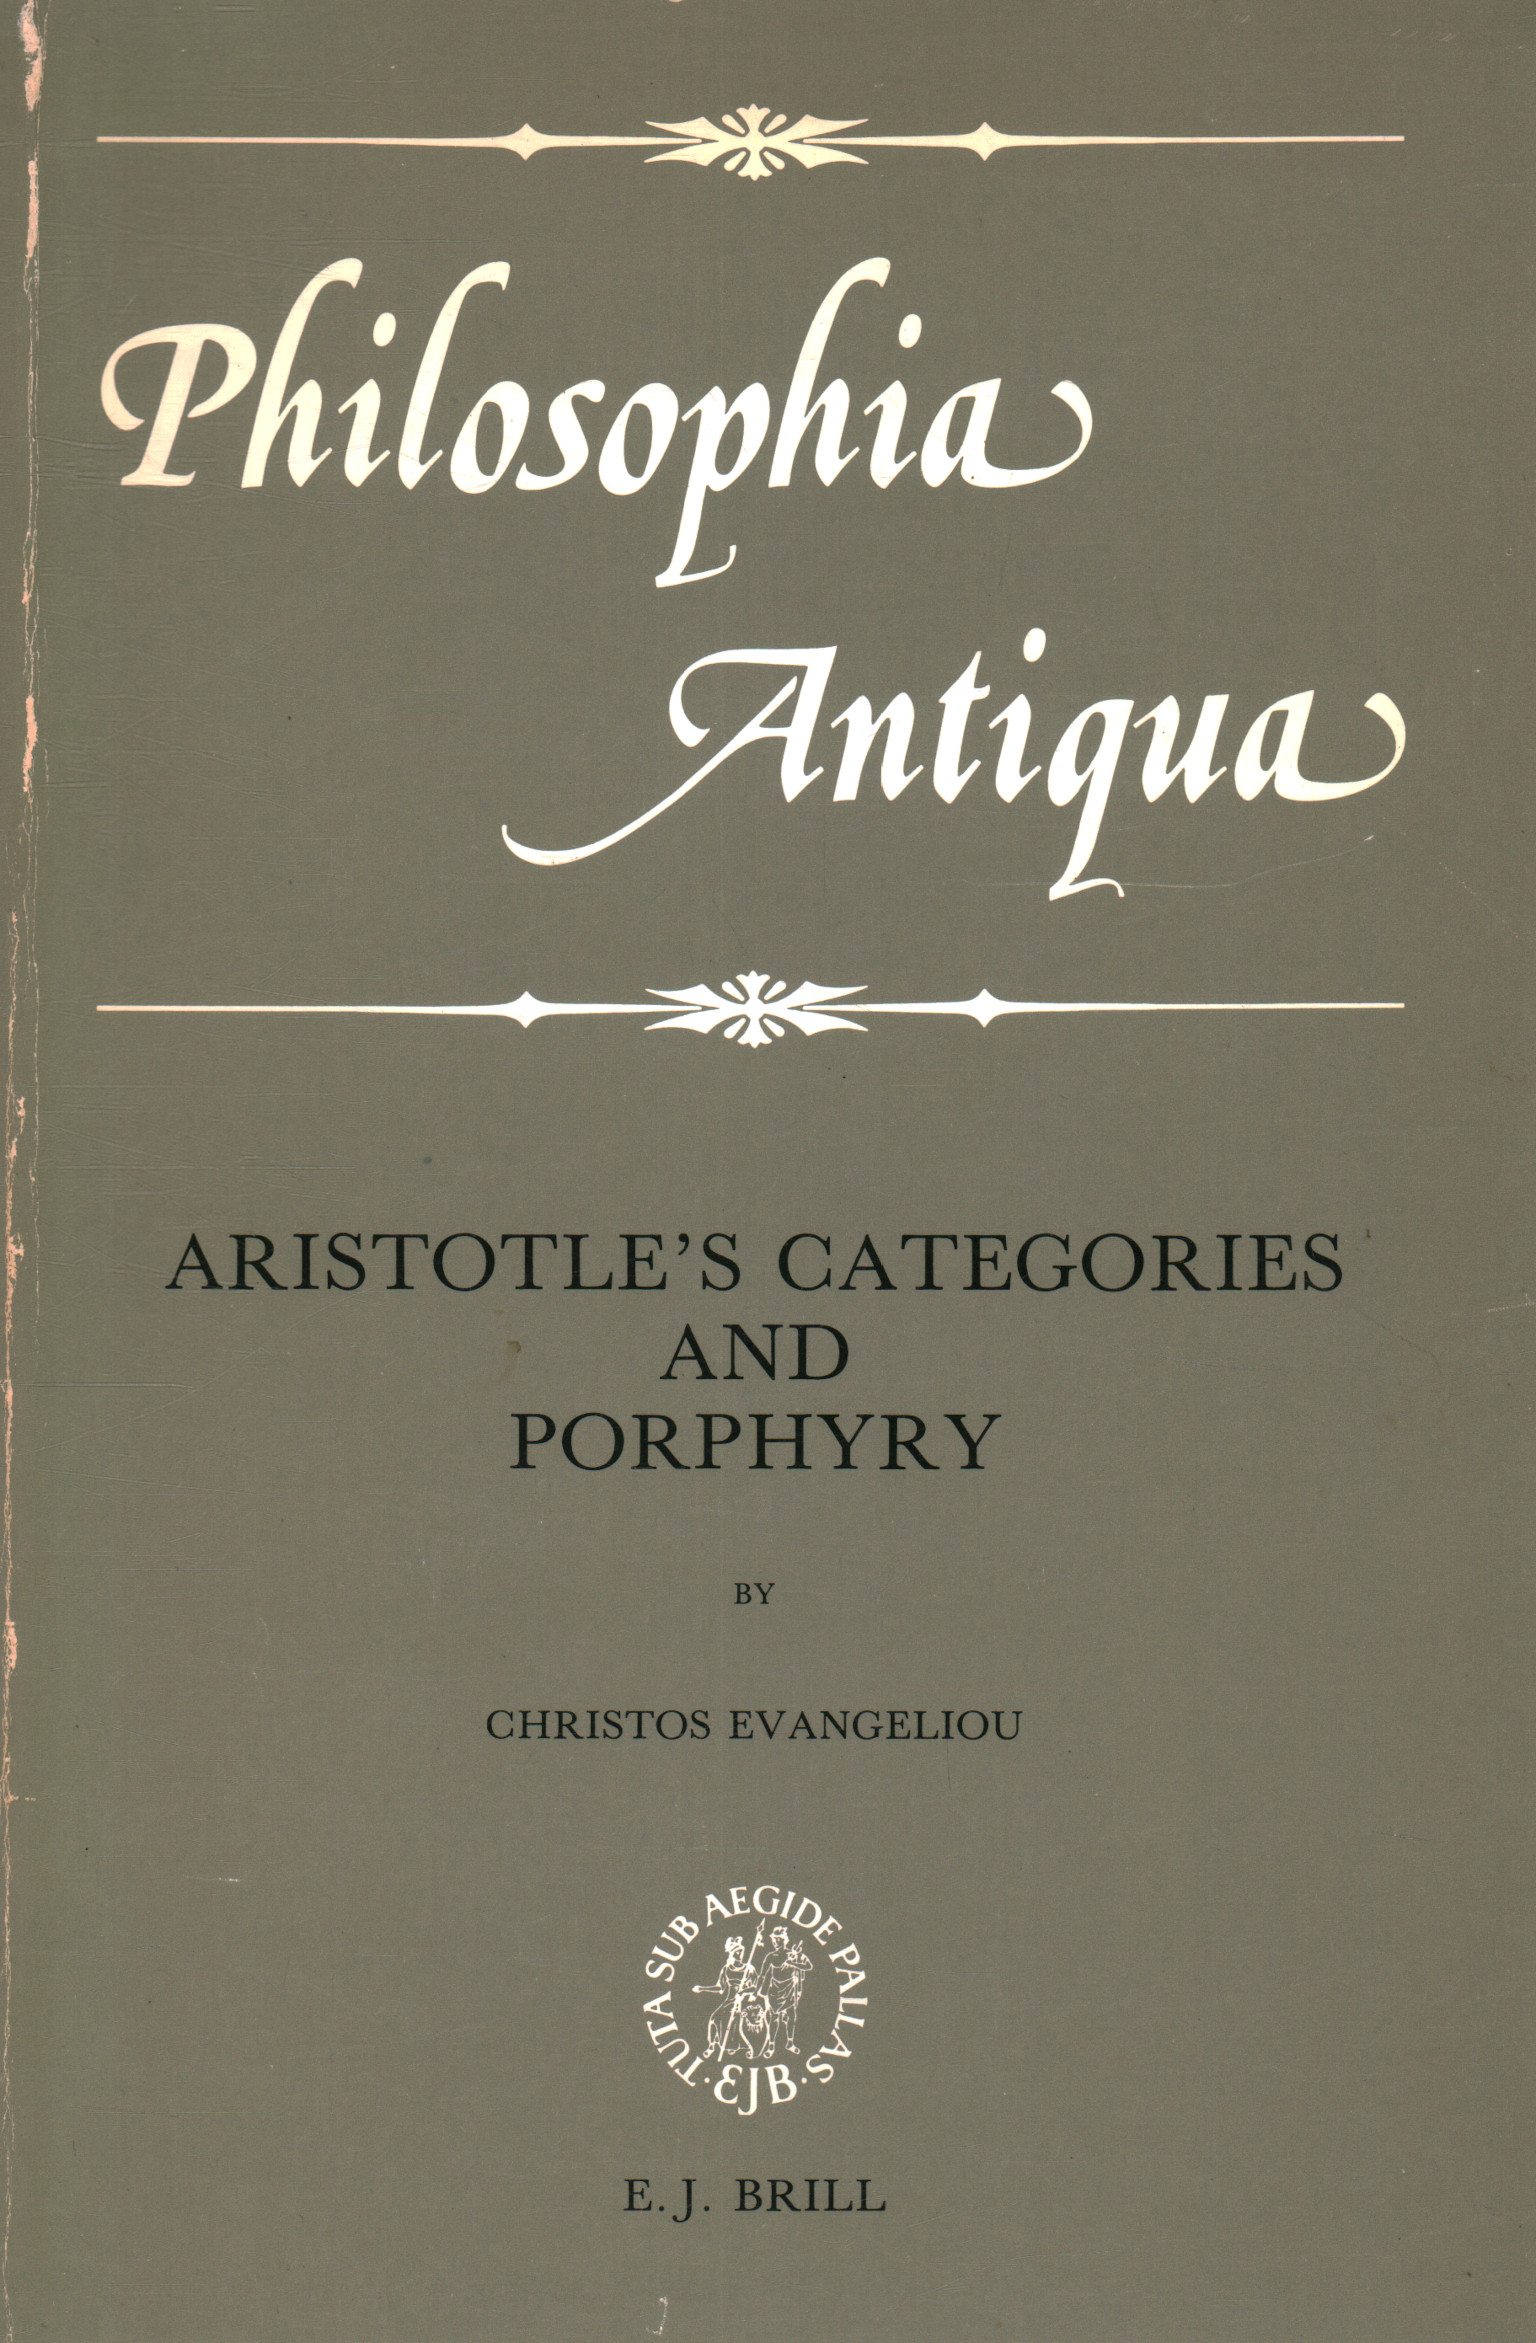 Aristotle's Categories and Porphy